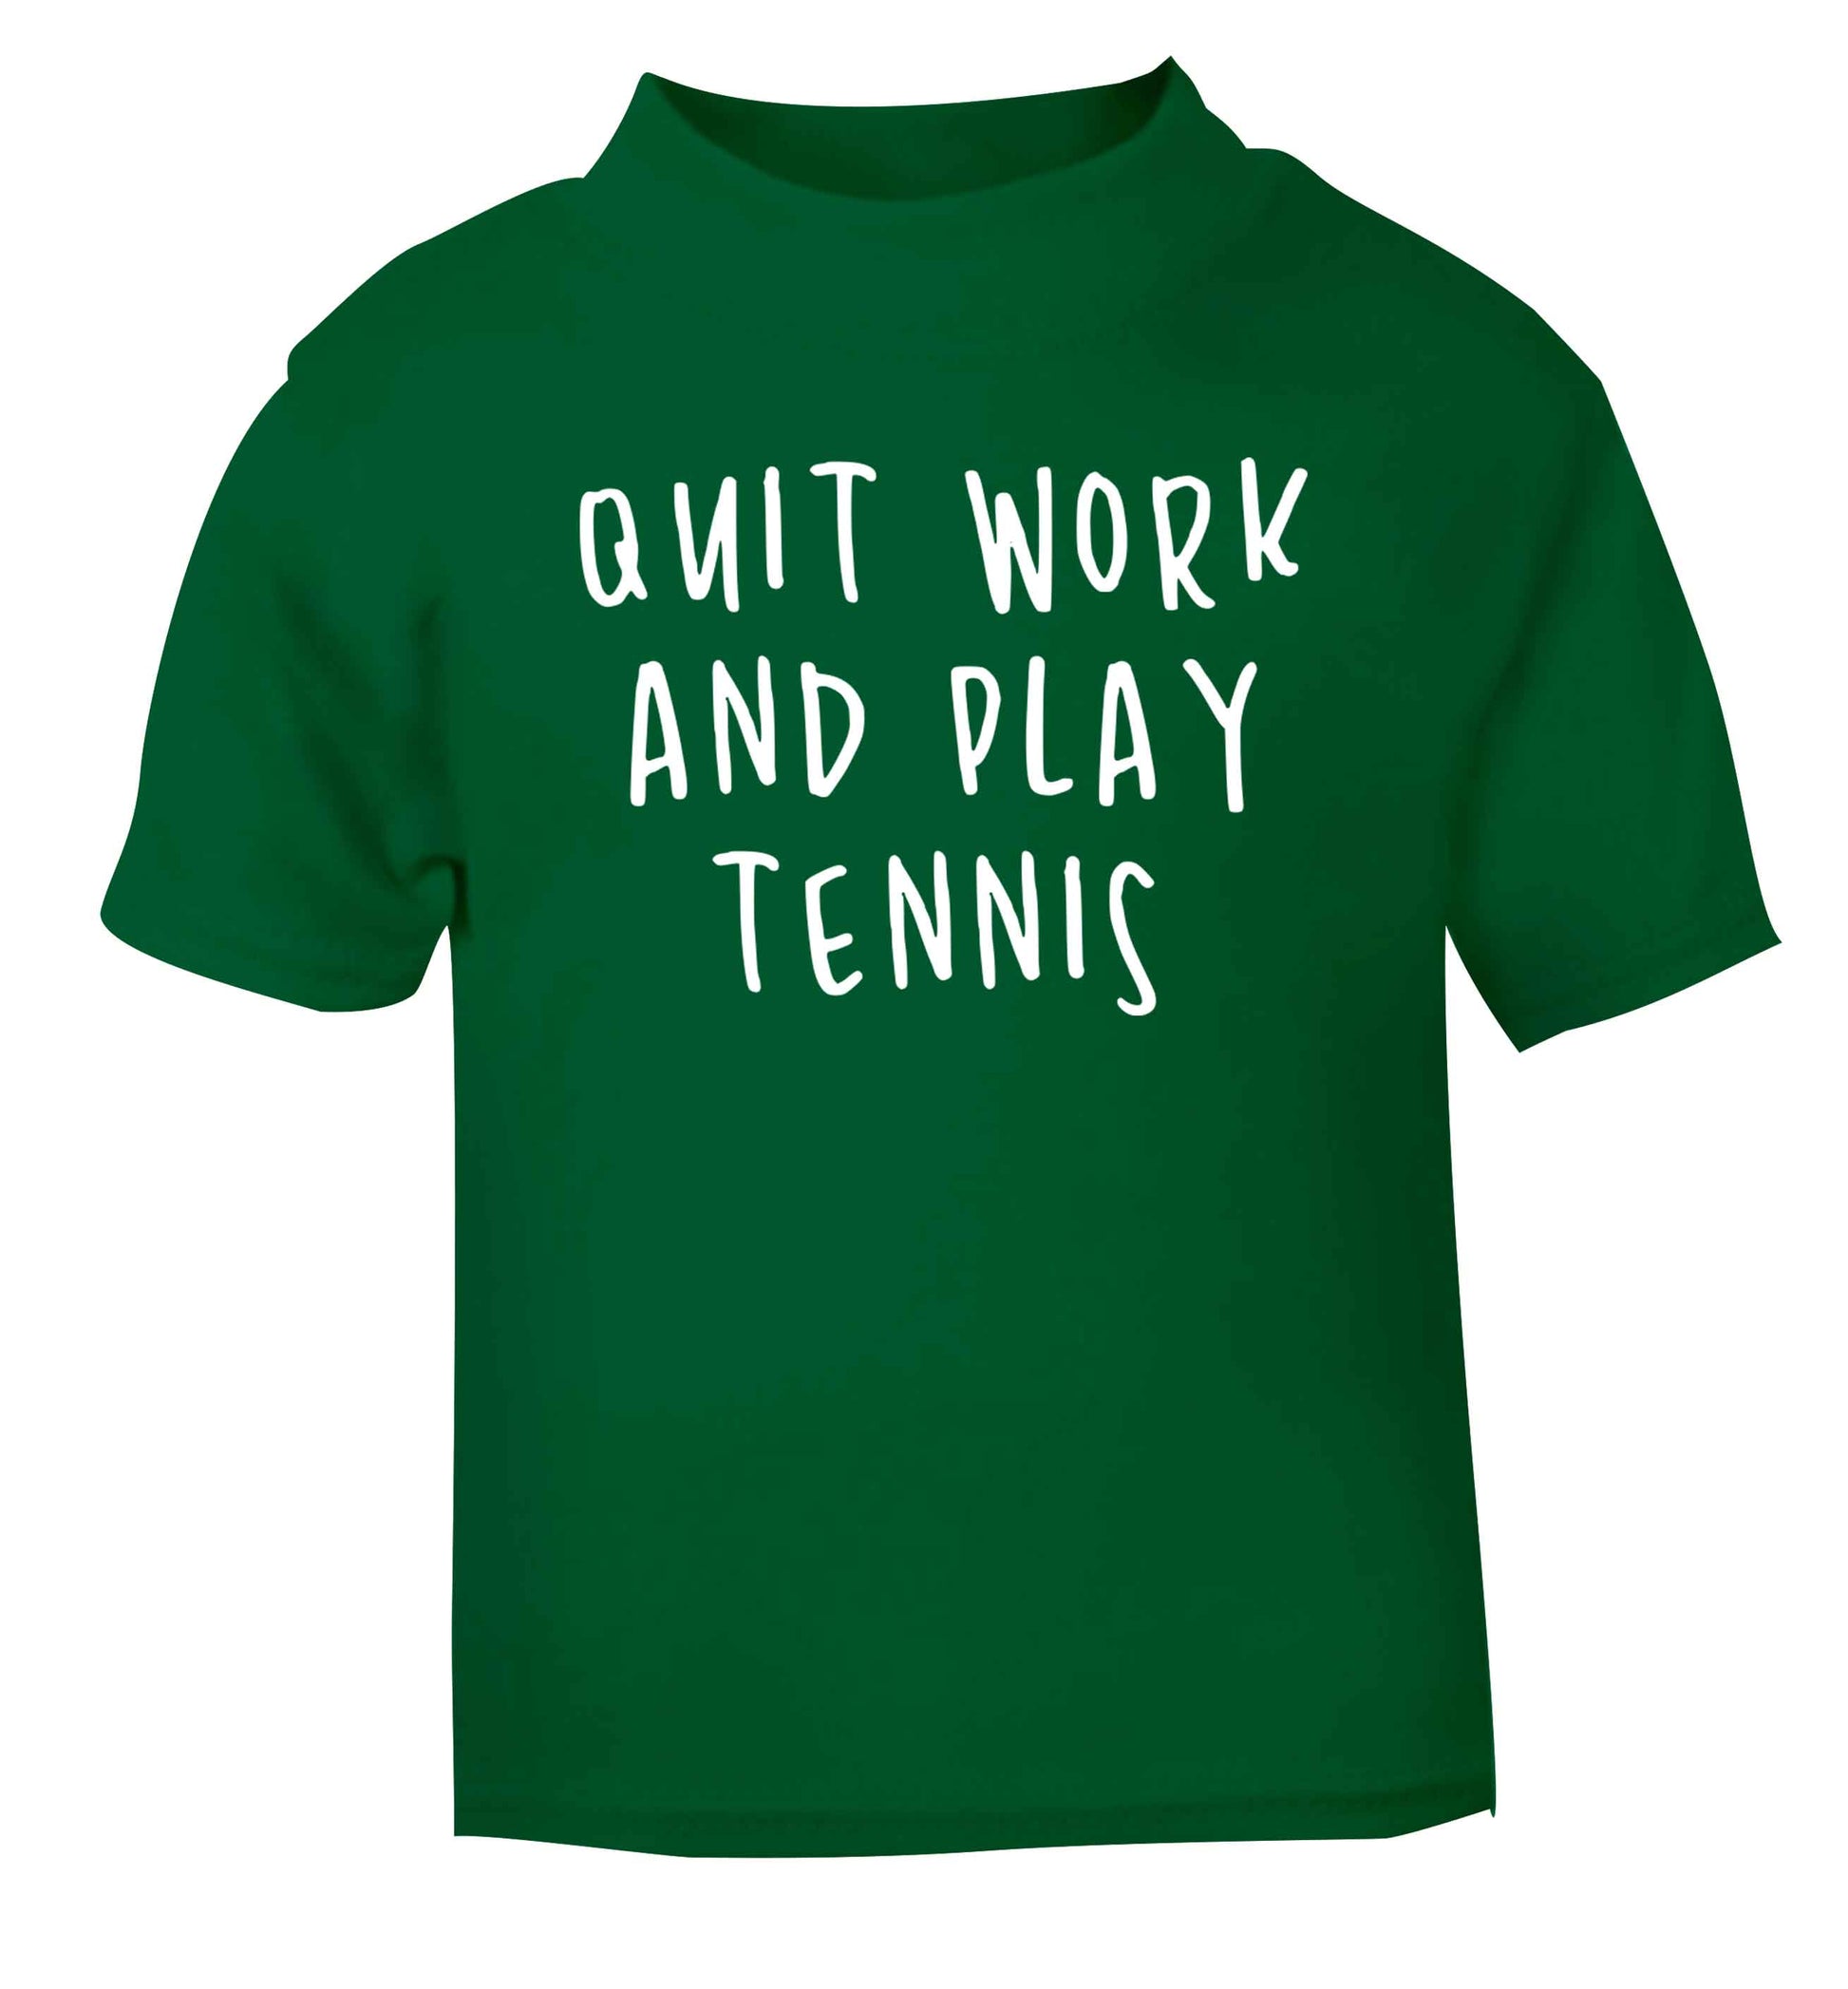 Quit work and play tennis green Baby Toddler Tshirt 2 Years